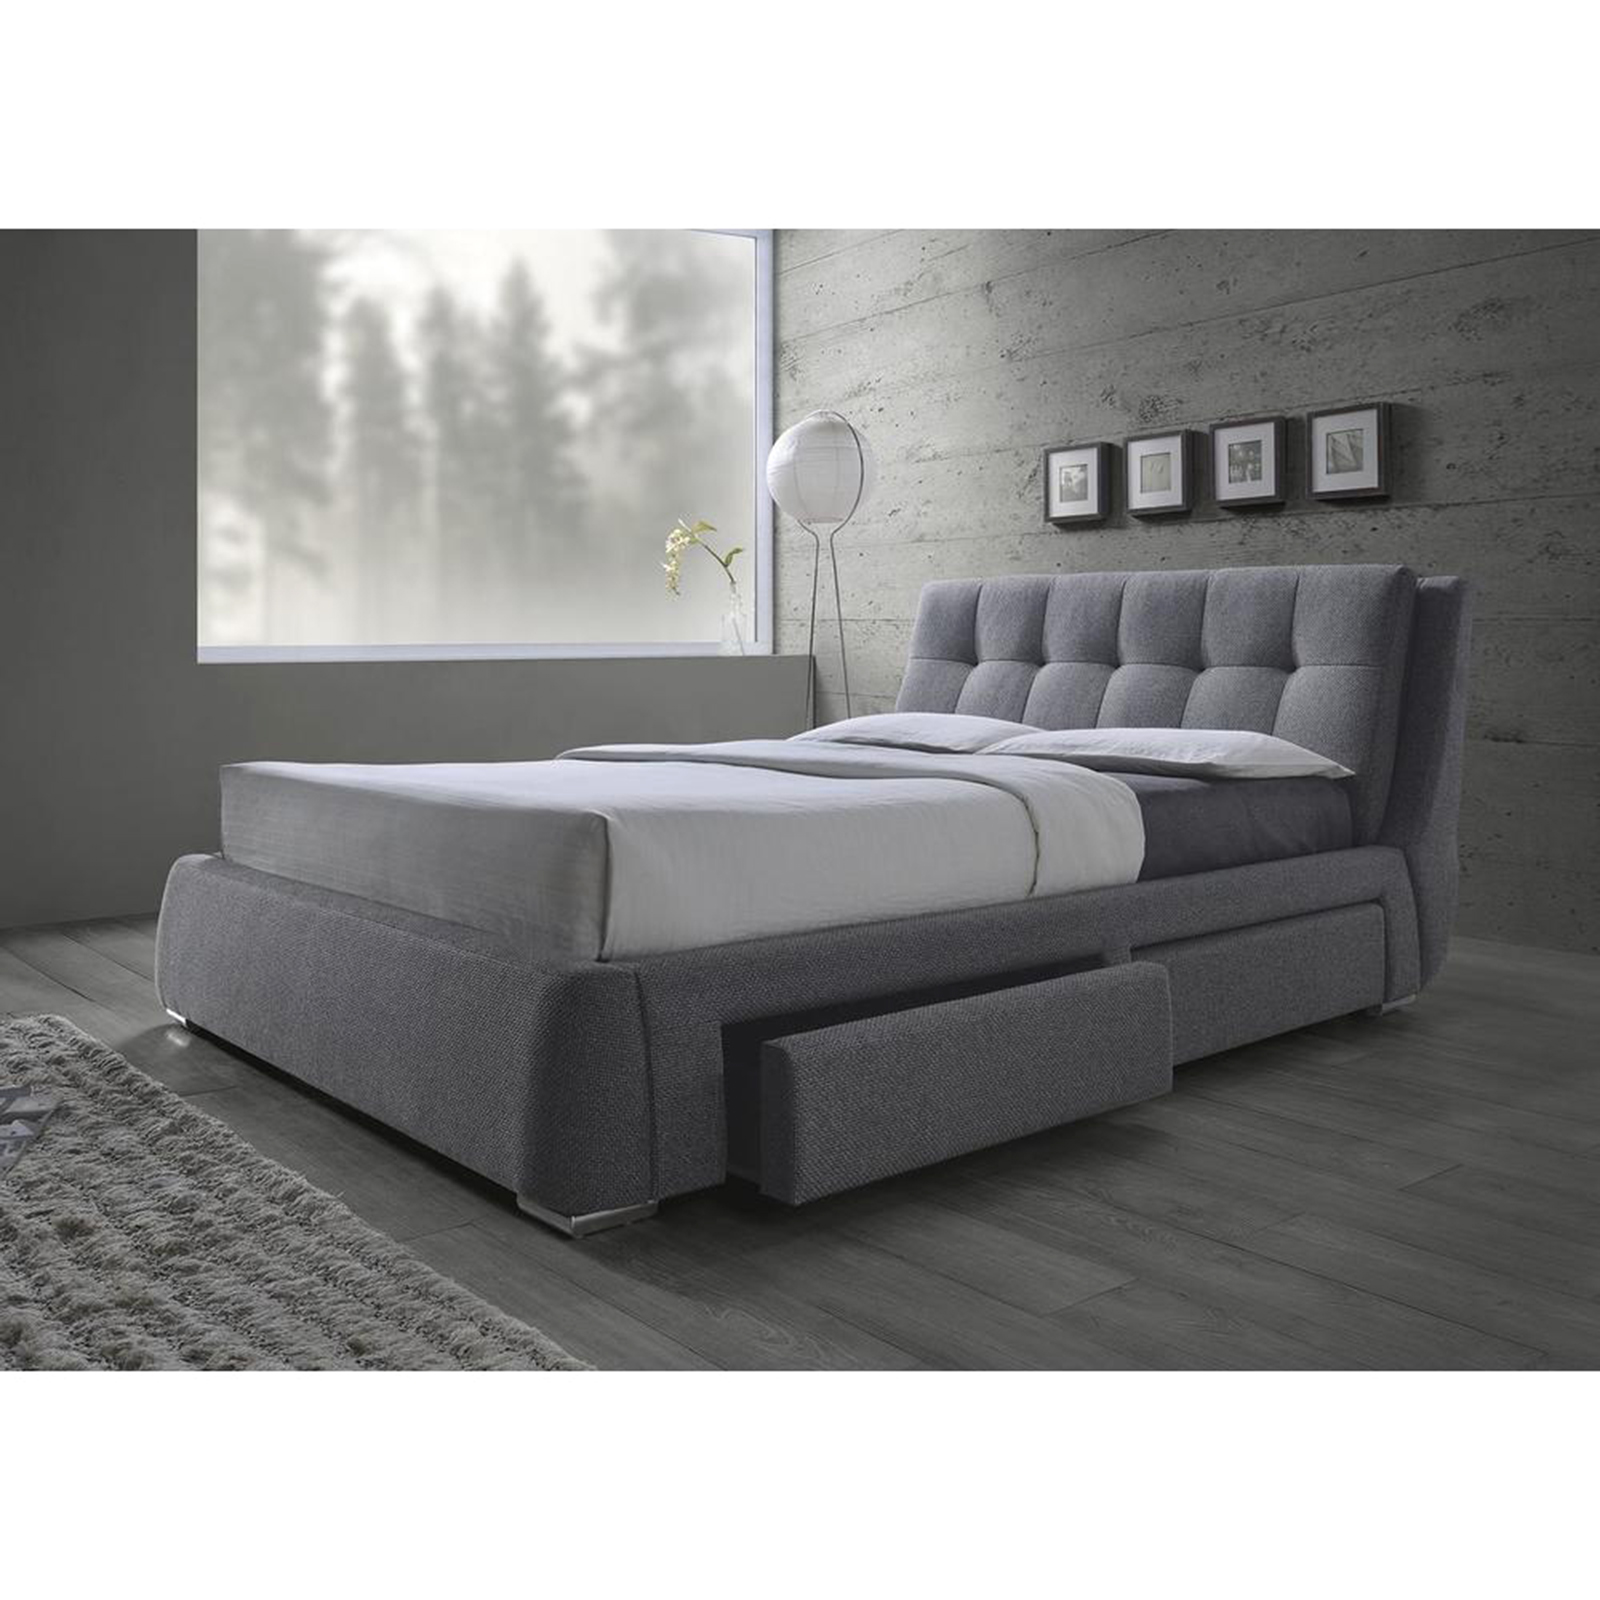 Coaster King Size Storage Bed with Drawers - Grey